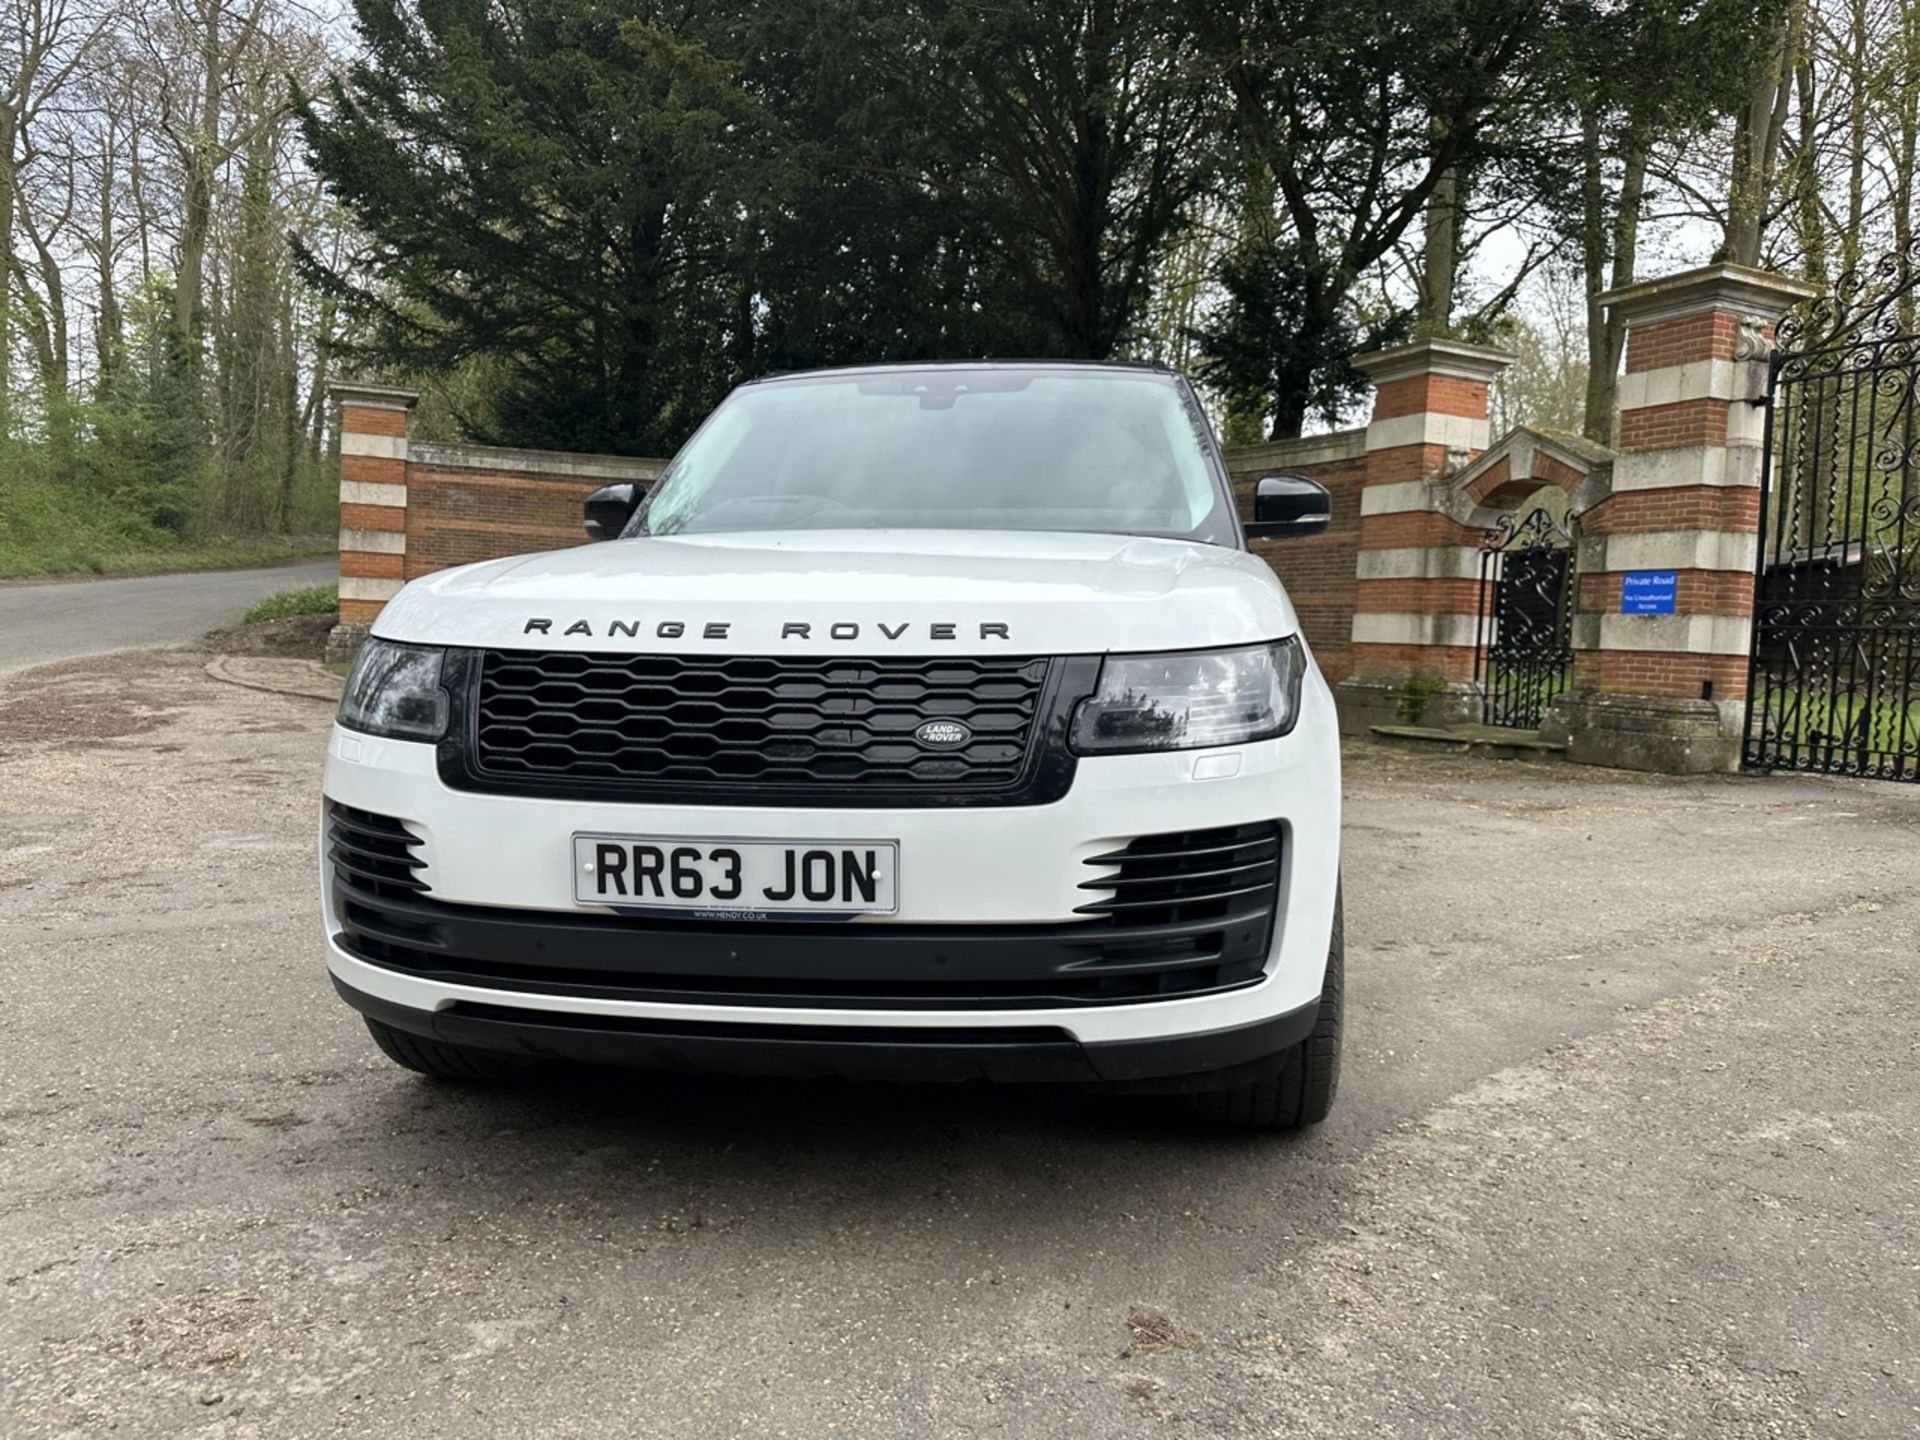 LAND ROVER RANGE ROVER 2.0 P400e Autobiography 4dr Auto - Automatic - 2018 - 31k miles - FULL SH - Image 3 of 17